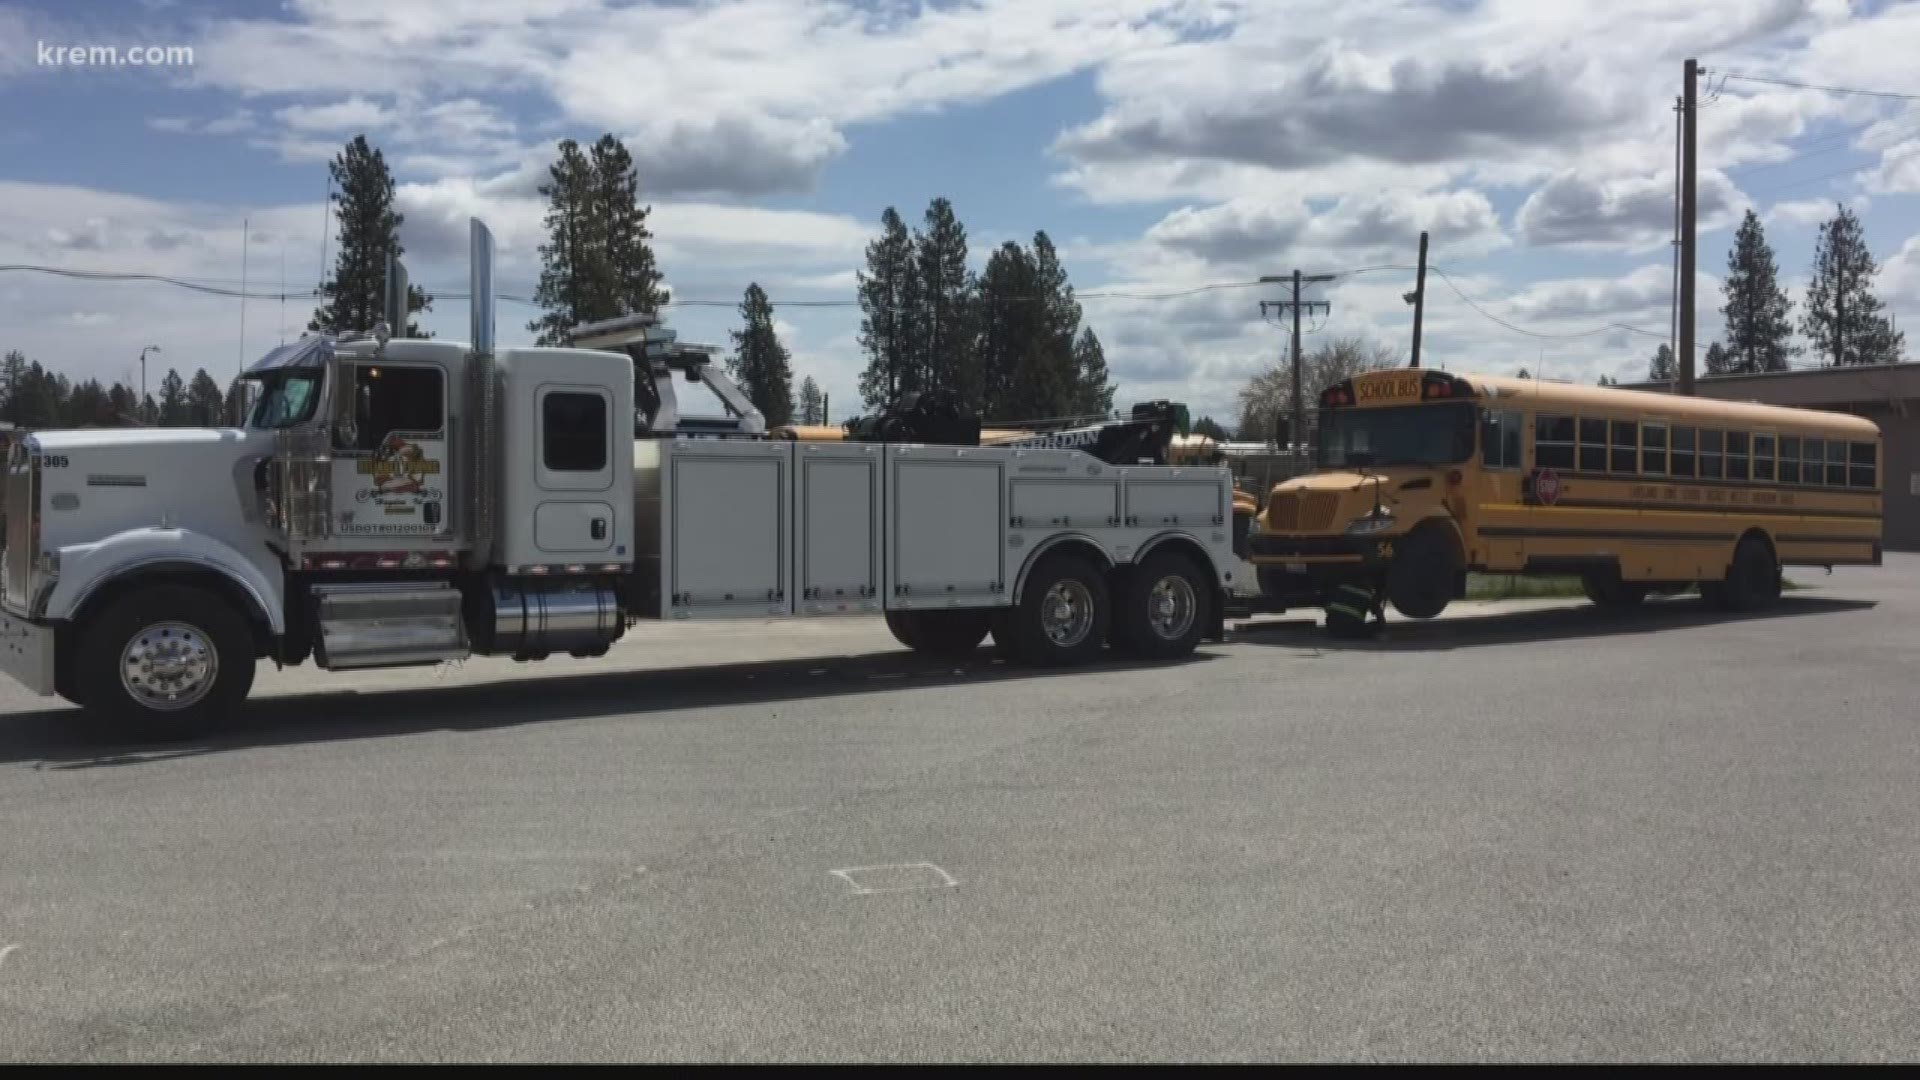 A North Idaho school district says it's struggling to keep up with its aging fleet of school buses. Students are still getting to school safely and on time, but keeping it that way has created too much work for district mechanics.